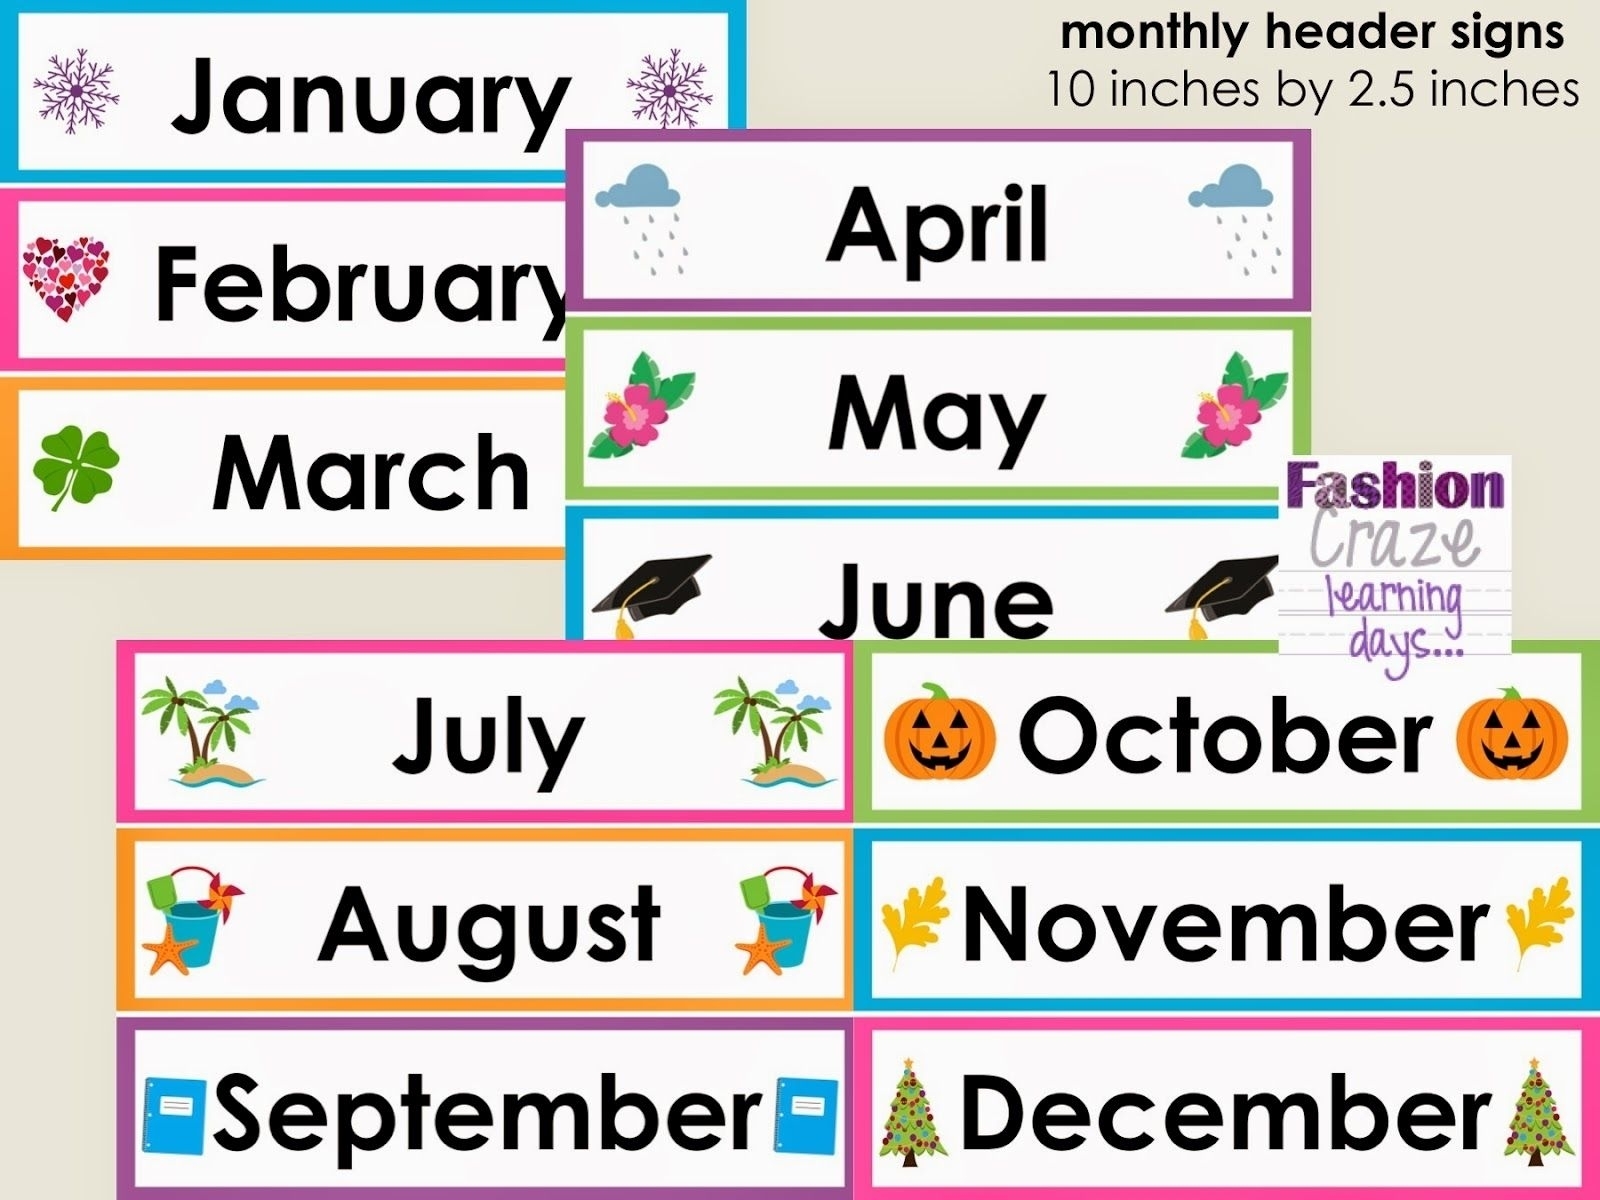 February is month of the year. Months of the year. Months names. Months in English. All months of the year.